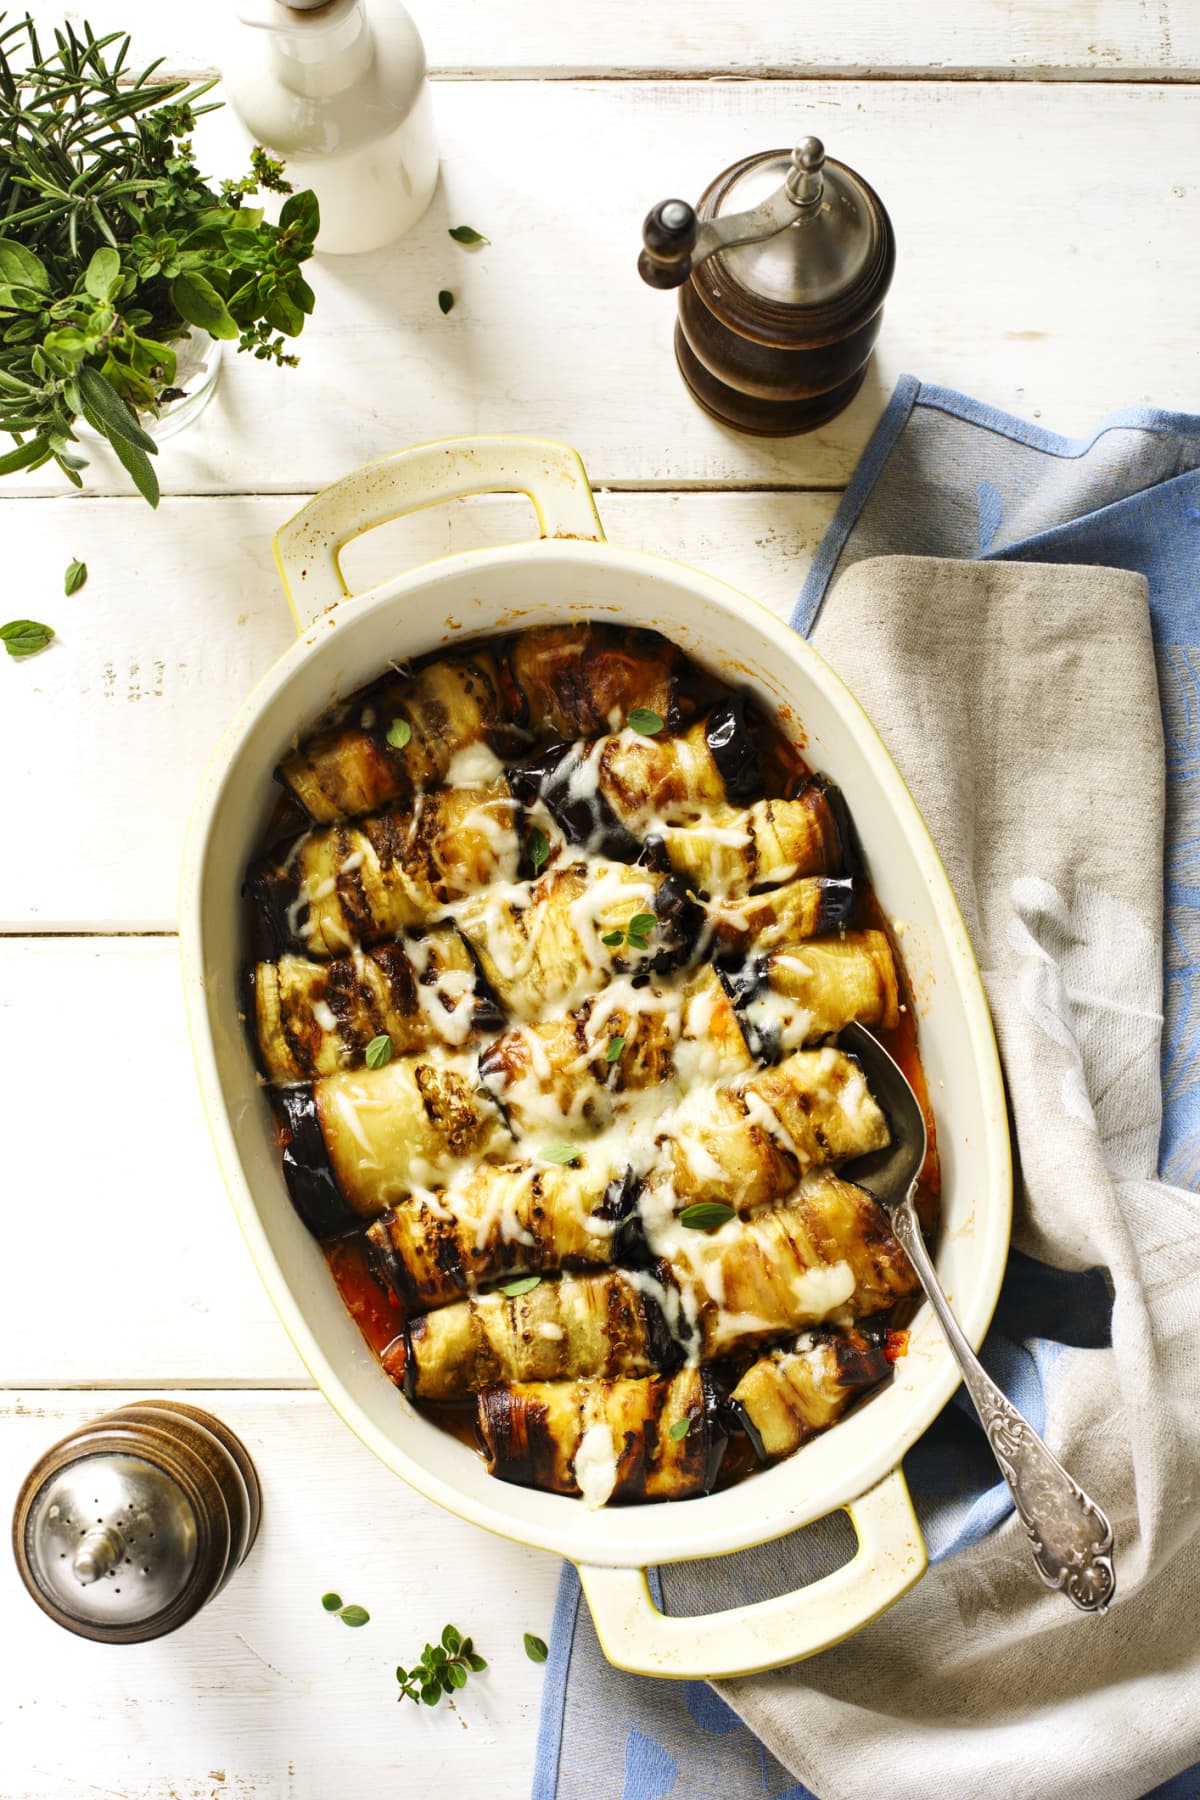 Casserole dish of baked eggplant rolls with cheese on top